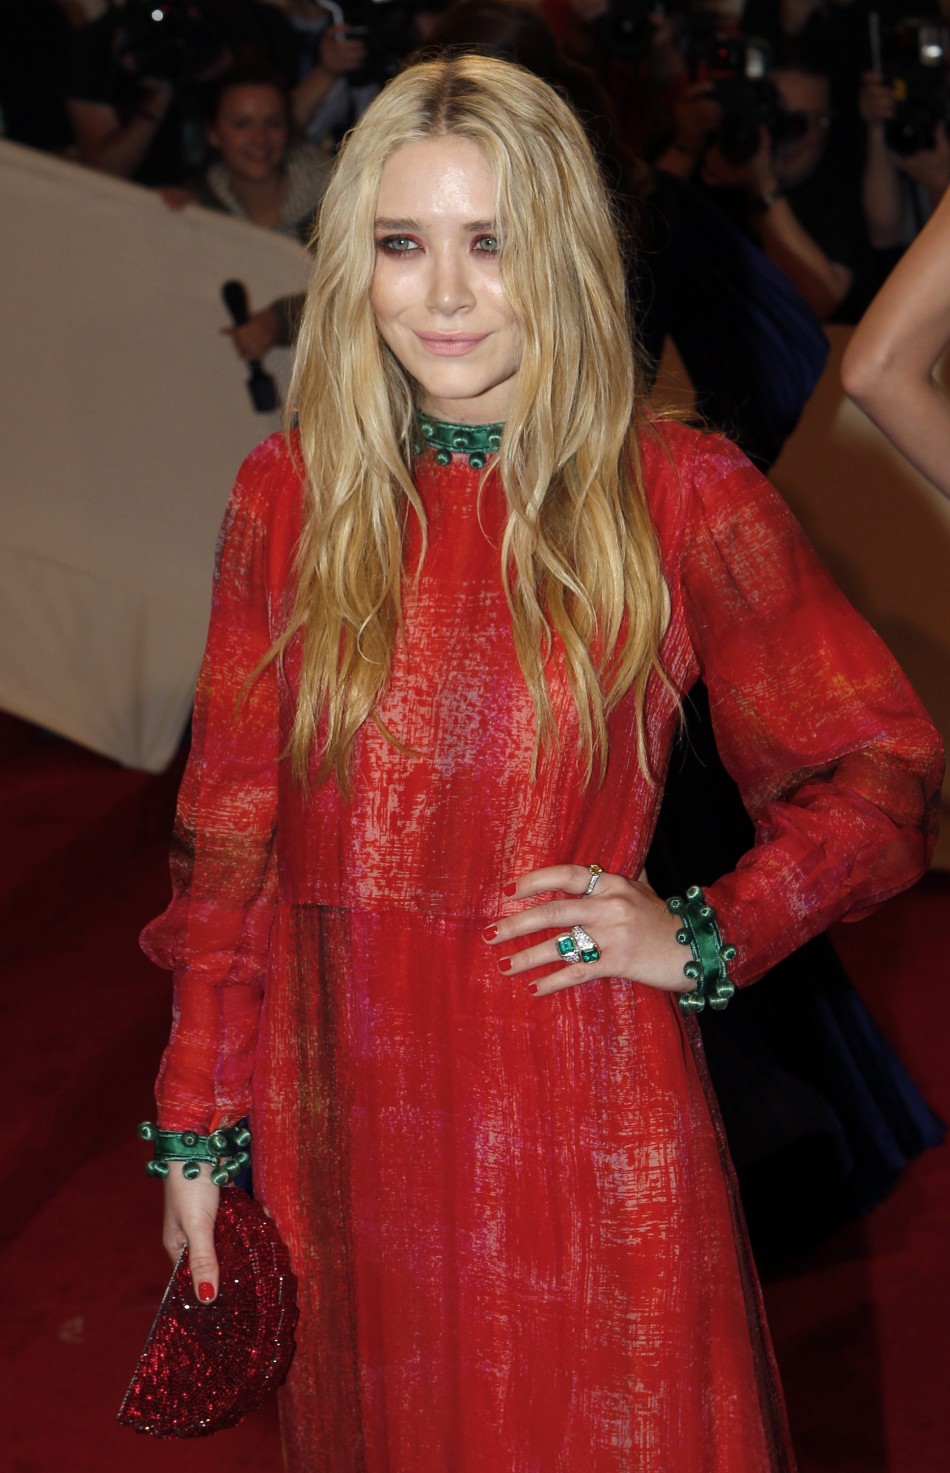 Mary Kate Olsen arrives at the Metropolitan Museum of Art Costume Institute Benefit celebrating the opening of Alexander McQueen Savage Beauty, in New York